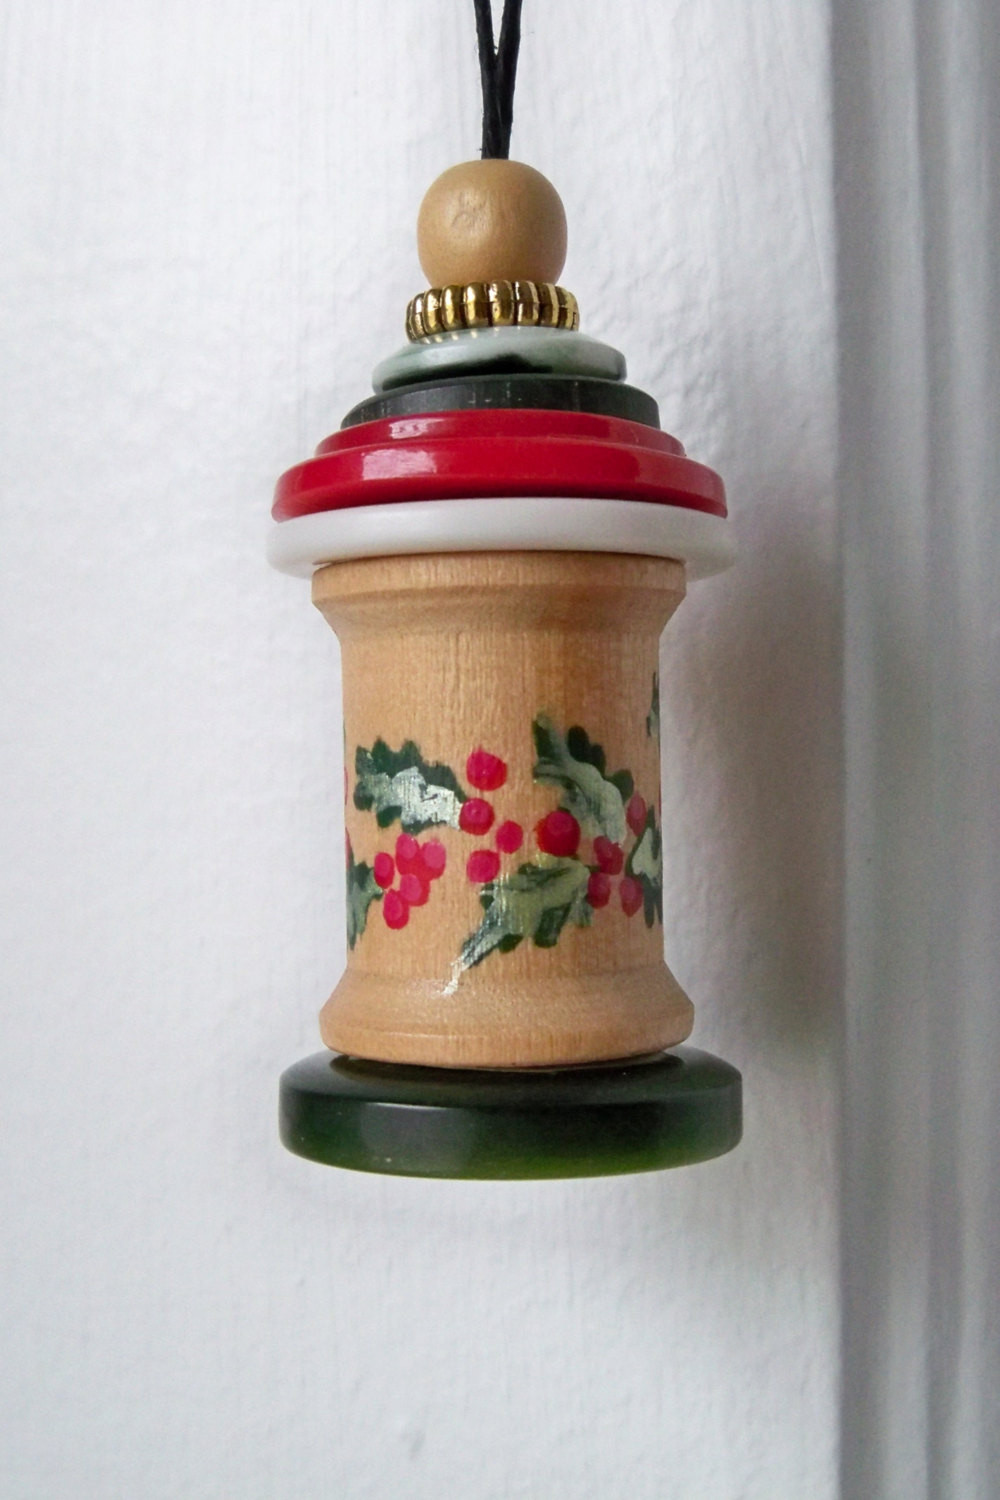 Wooden Spool Craft Ideas
 Hand Painted Spool and Button Christmas Tree Ornament